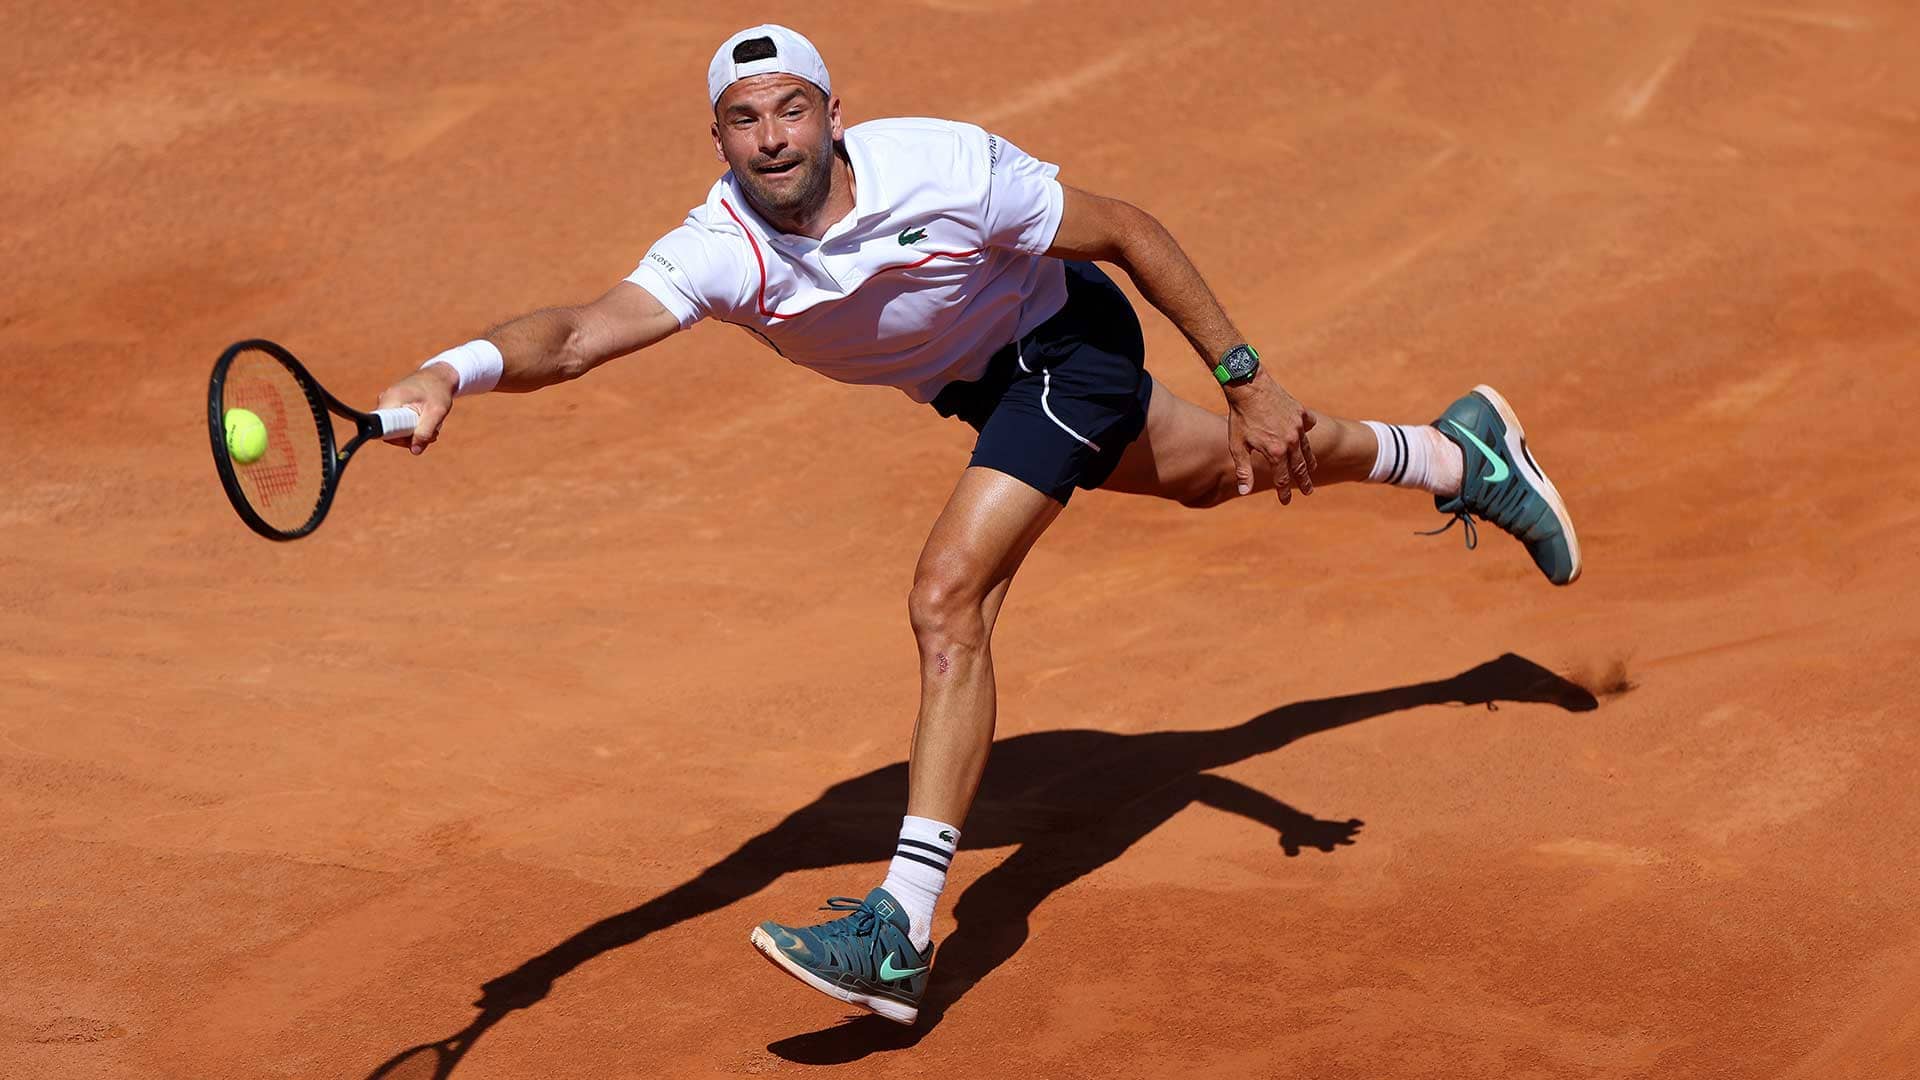 Dimitrov wins 'one of the most difficult matches of the year' to advance in Rome